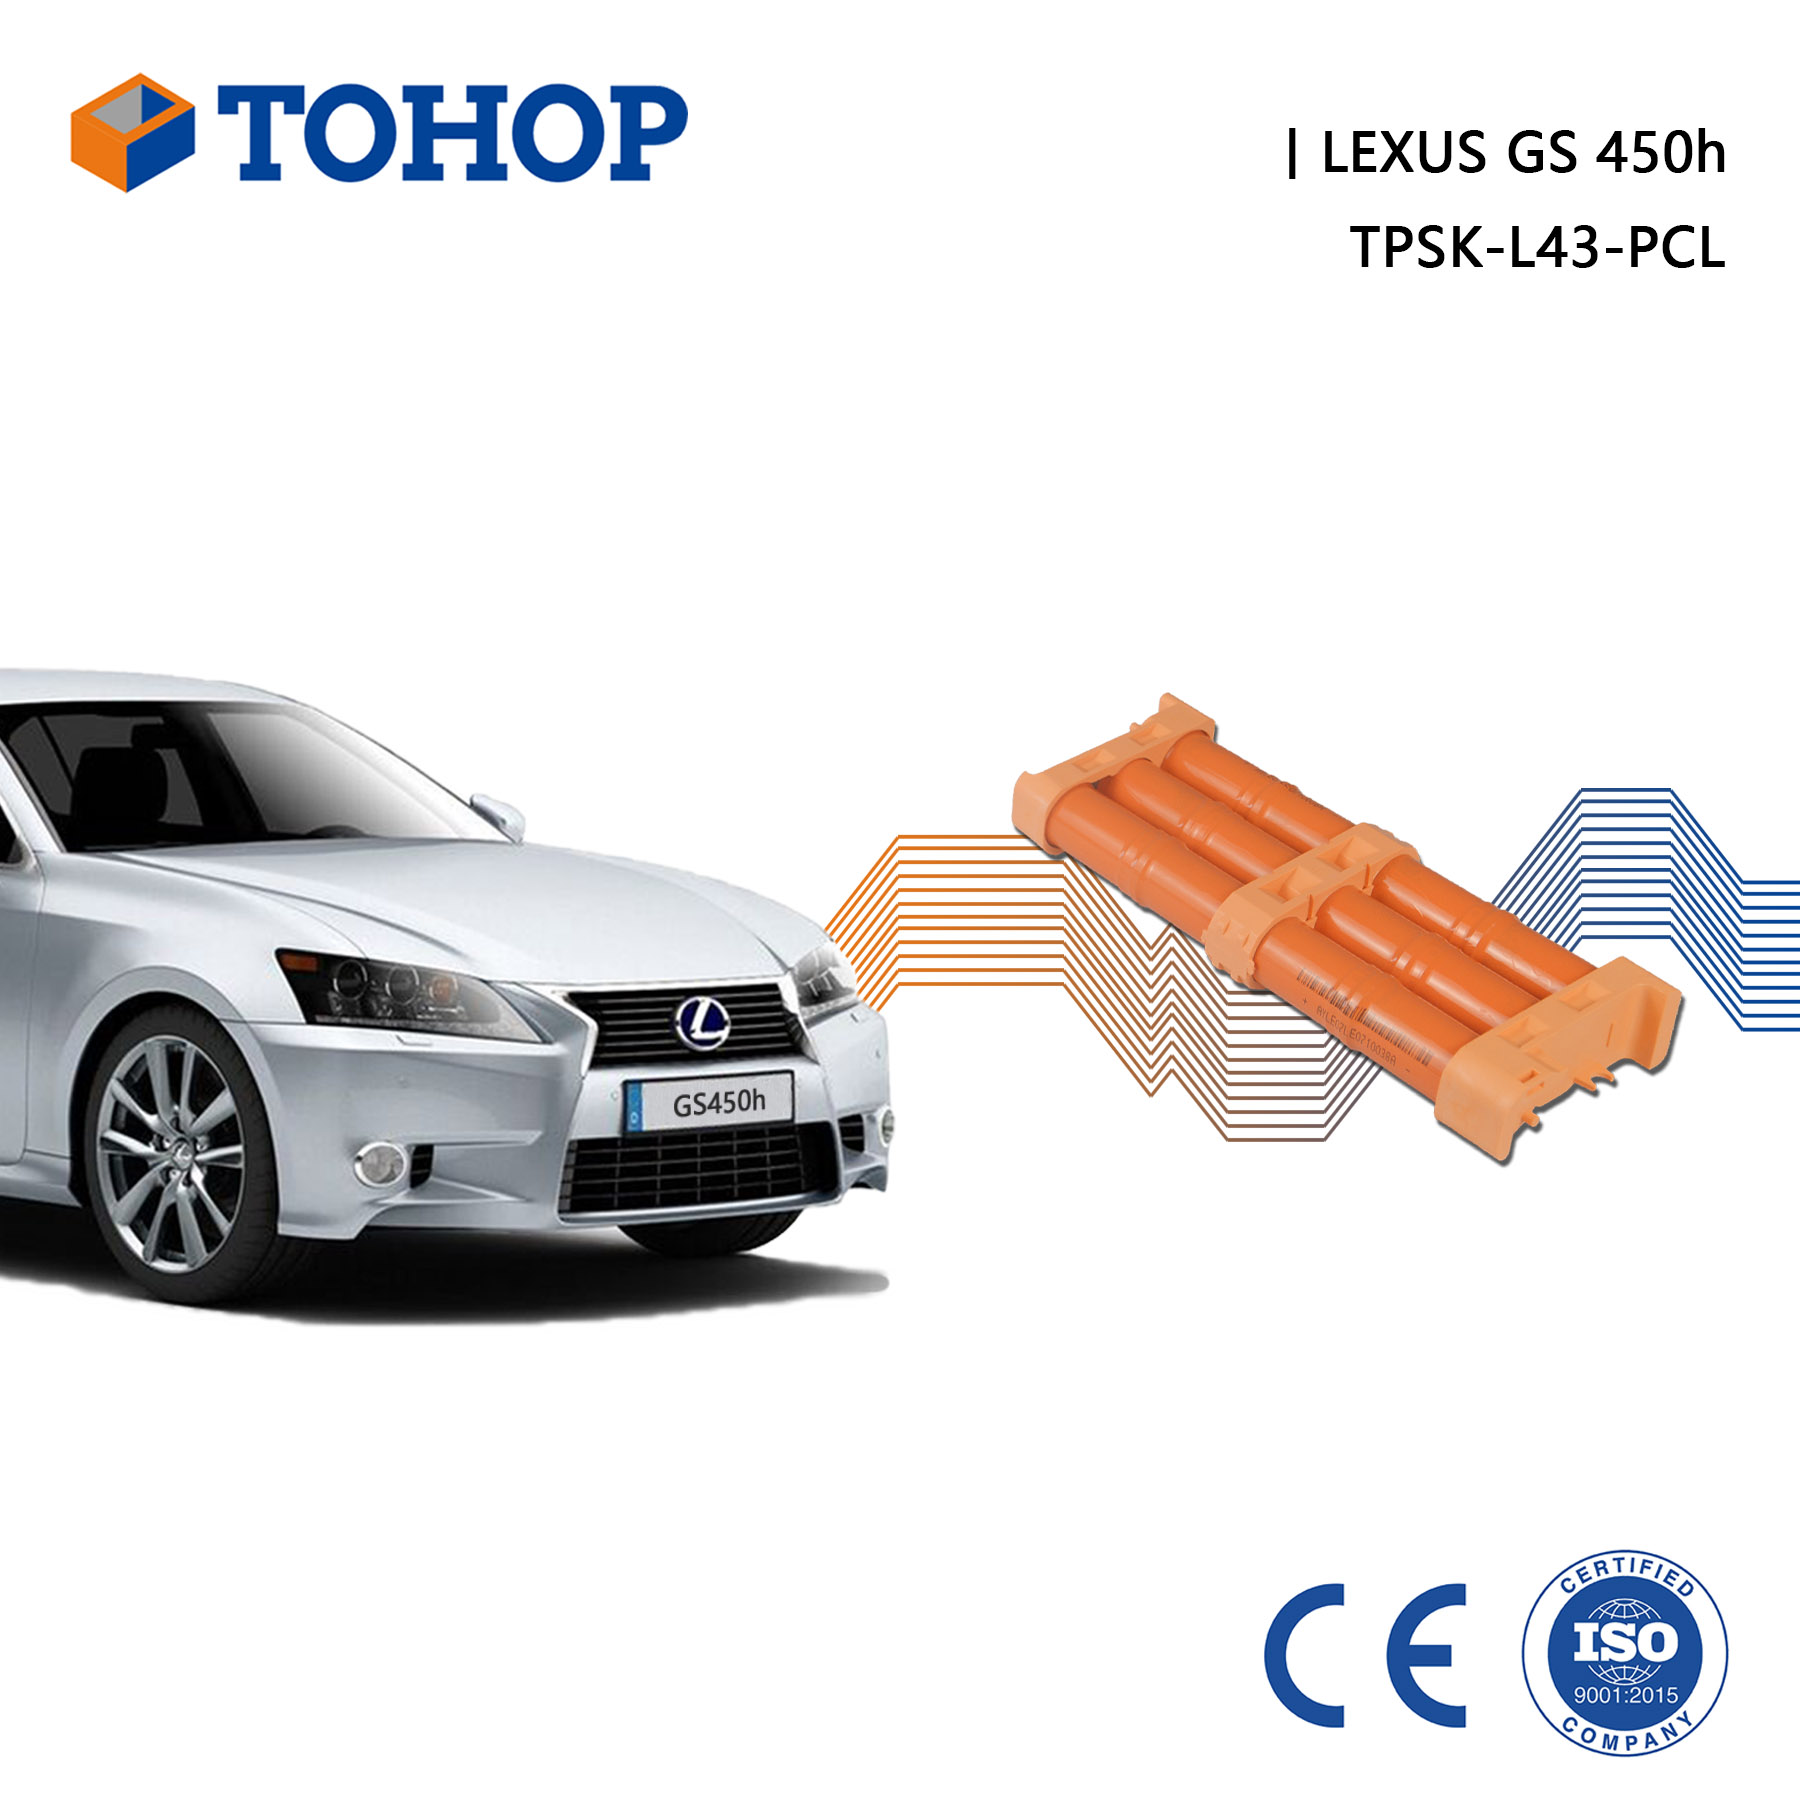 Lexus Thrid Gen. S190 Replacement Hybrid Battery Pack for HEV